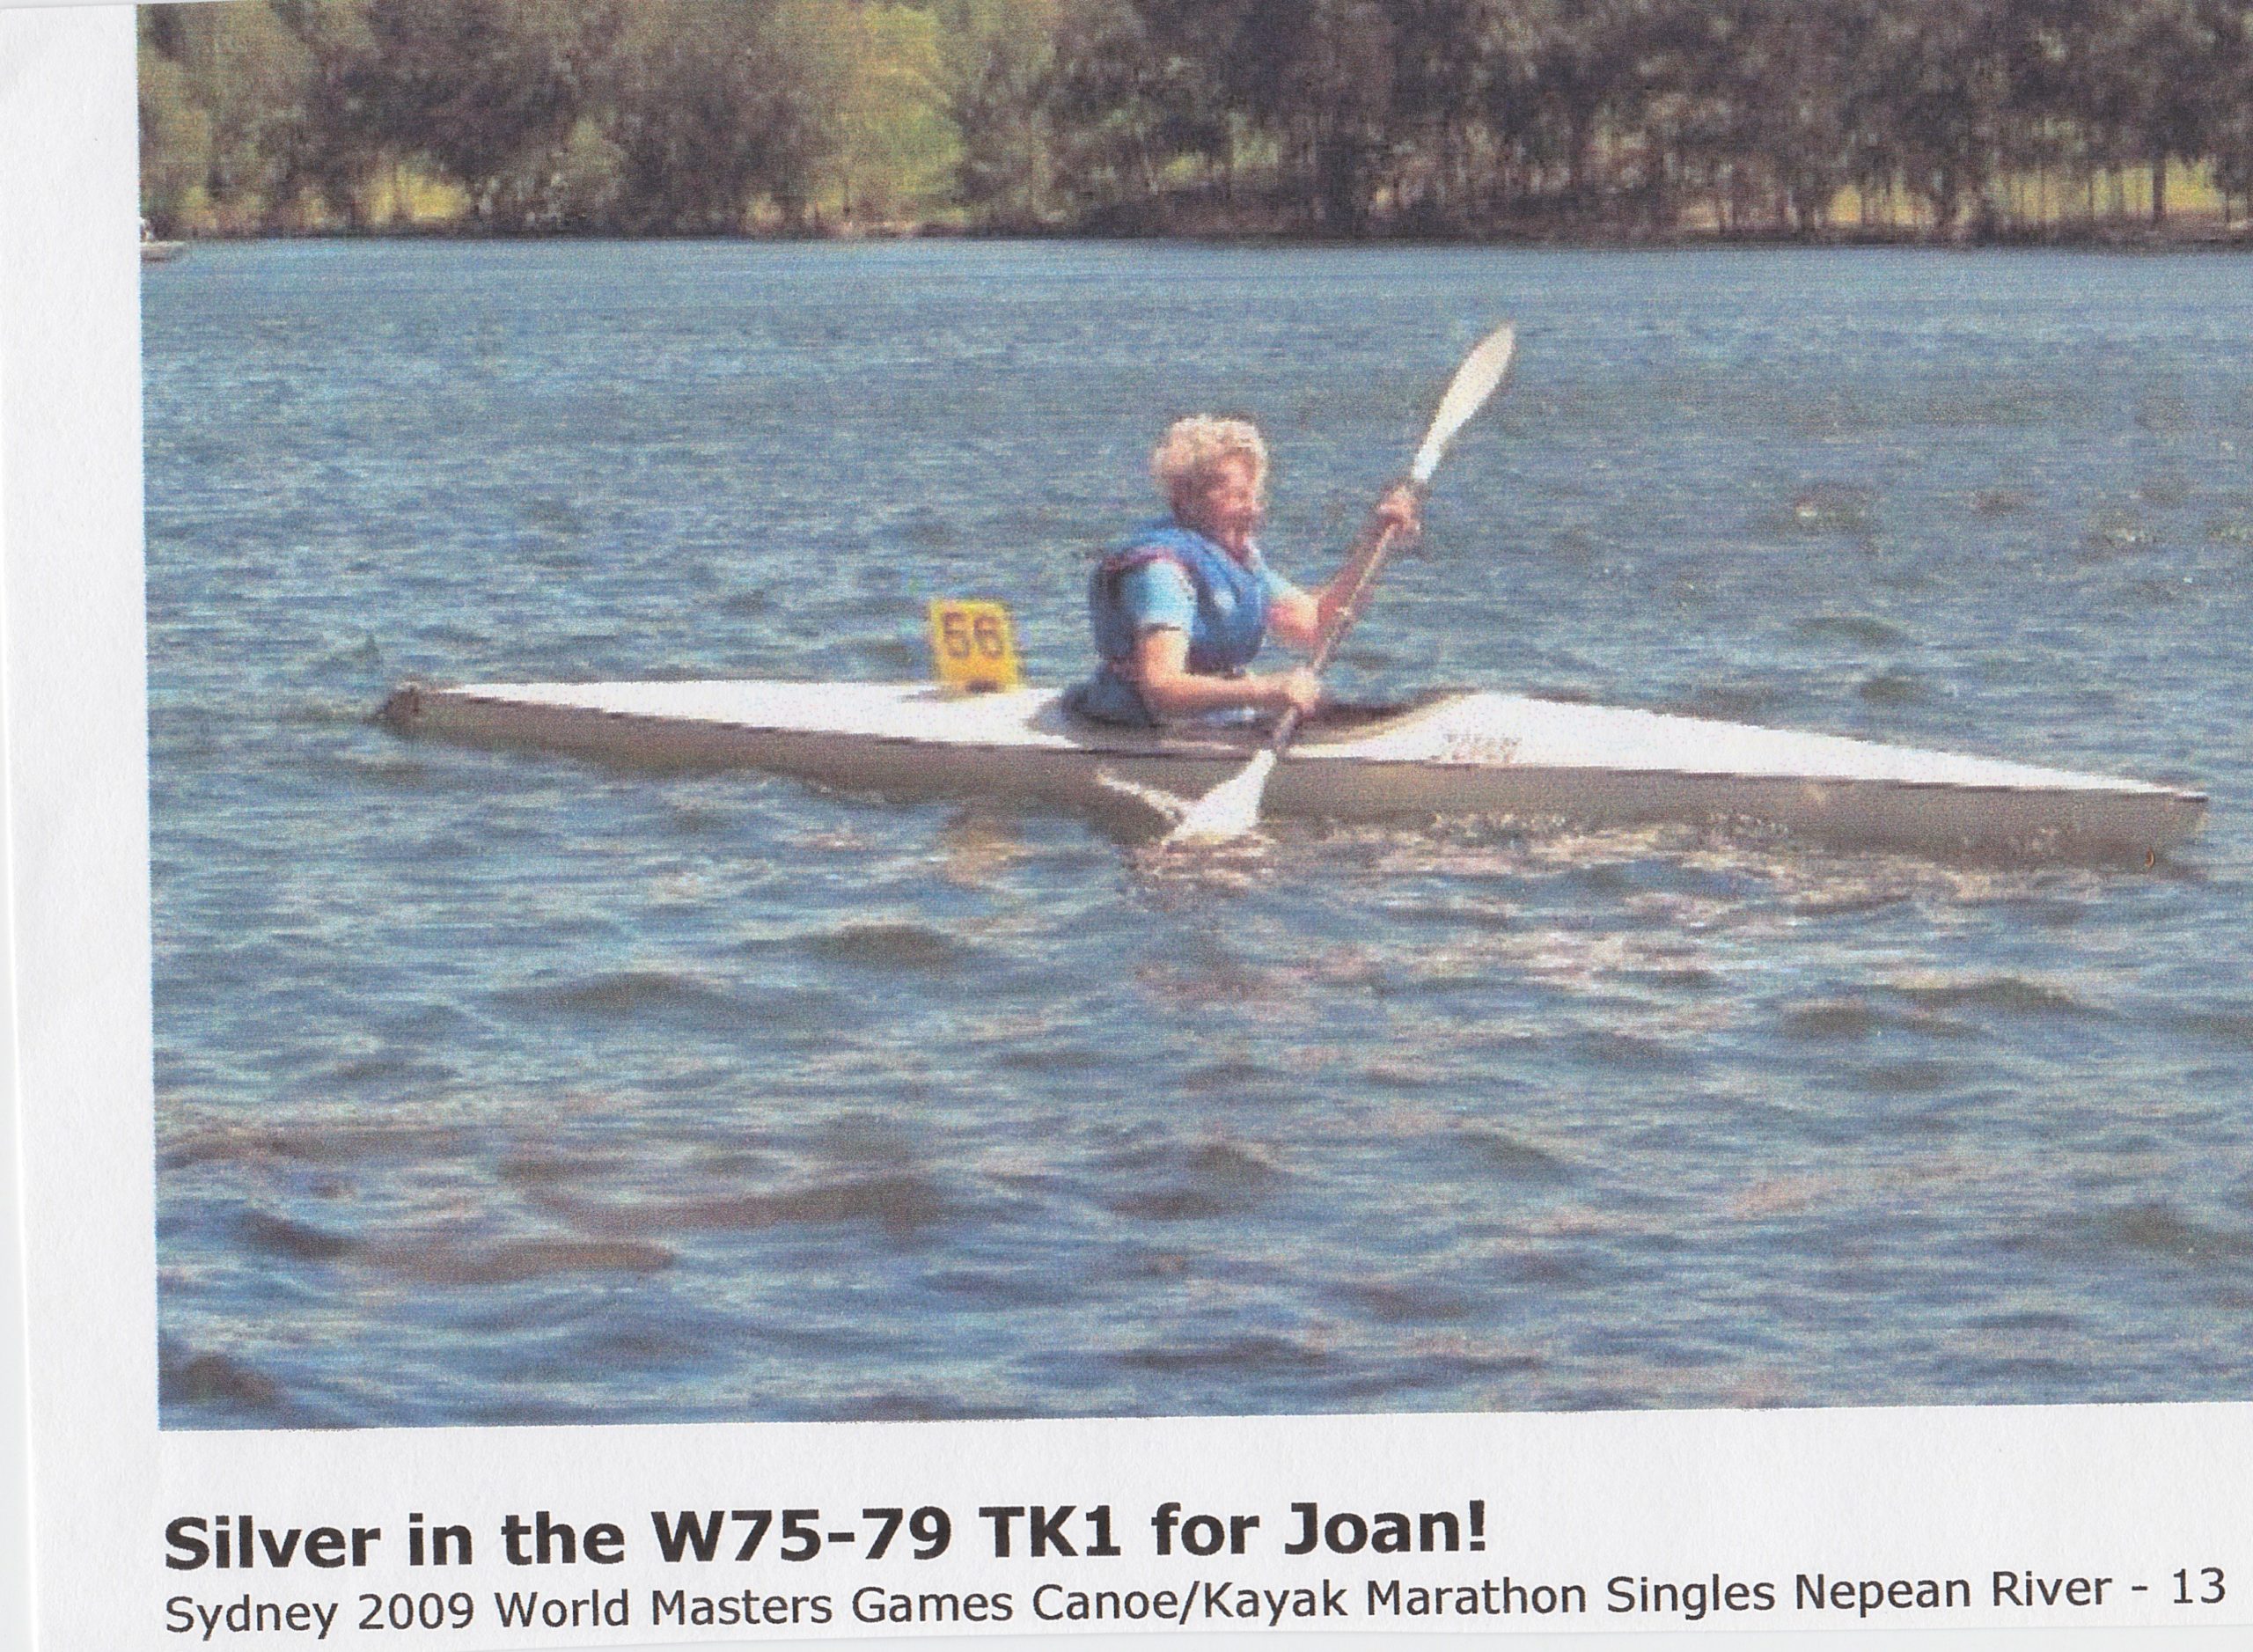 Joan paddling a white K1 with the boat number 56